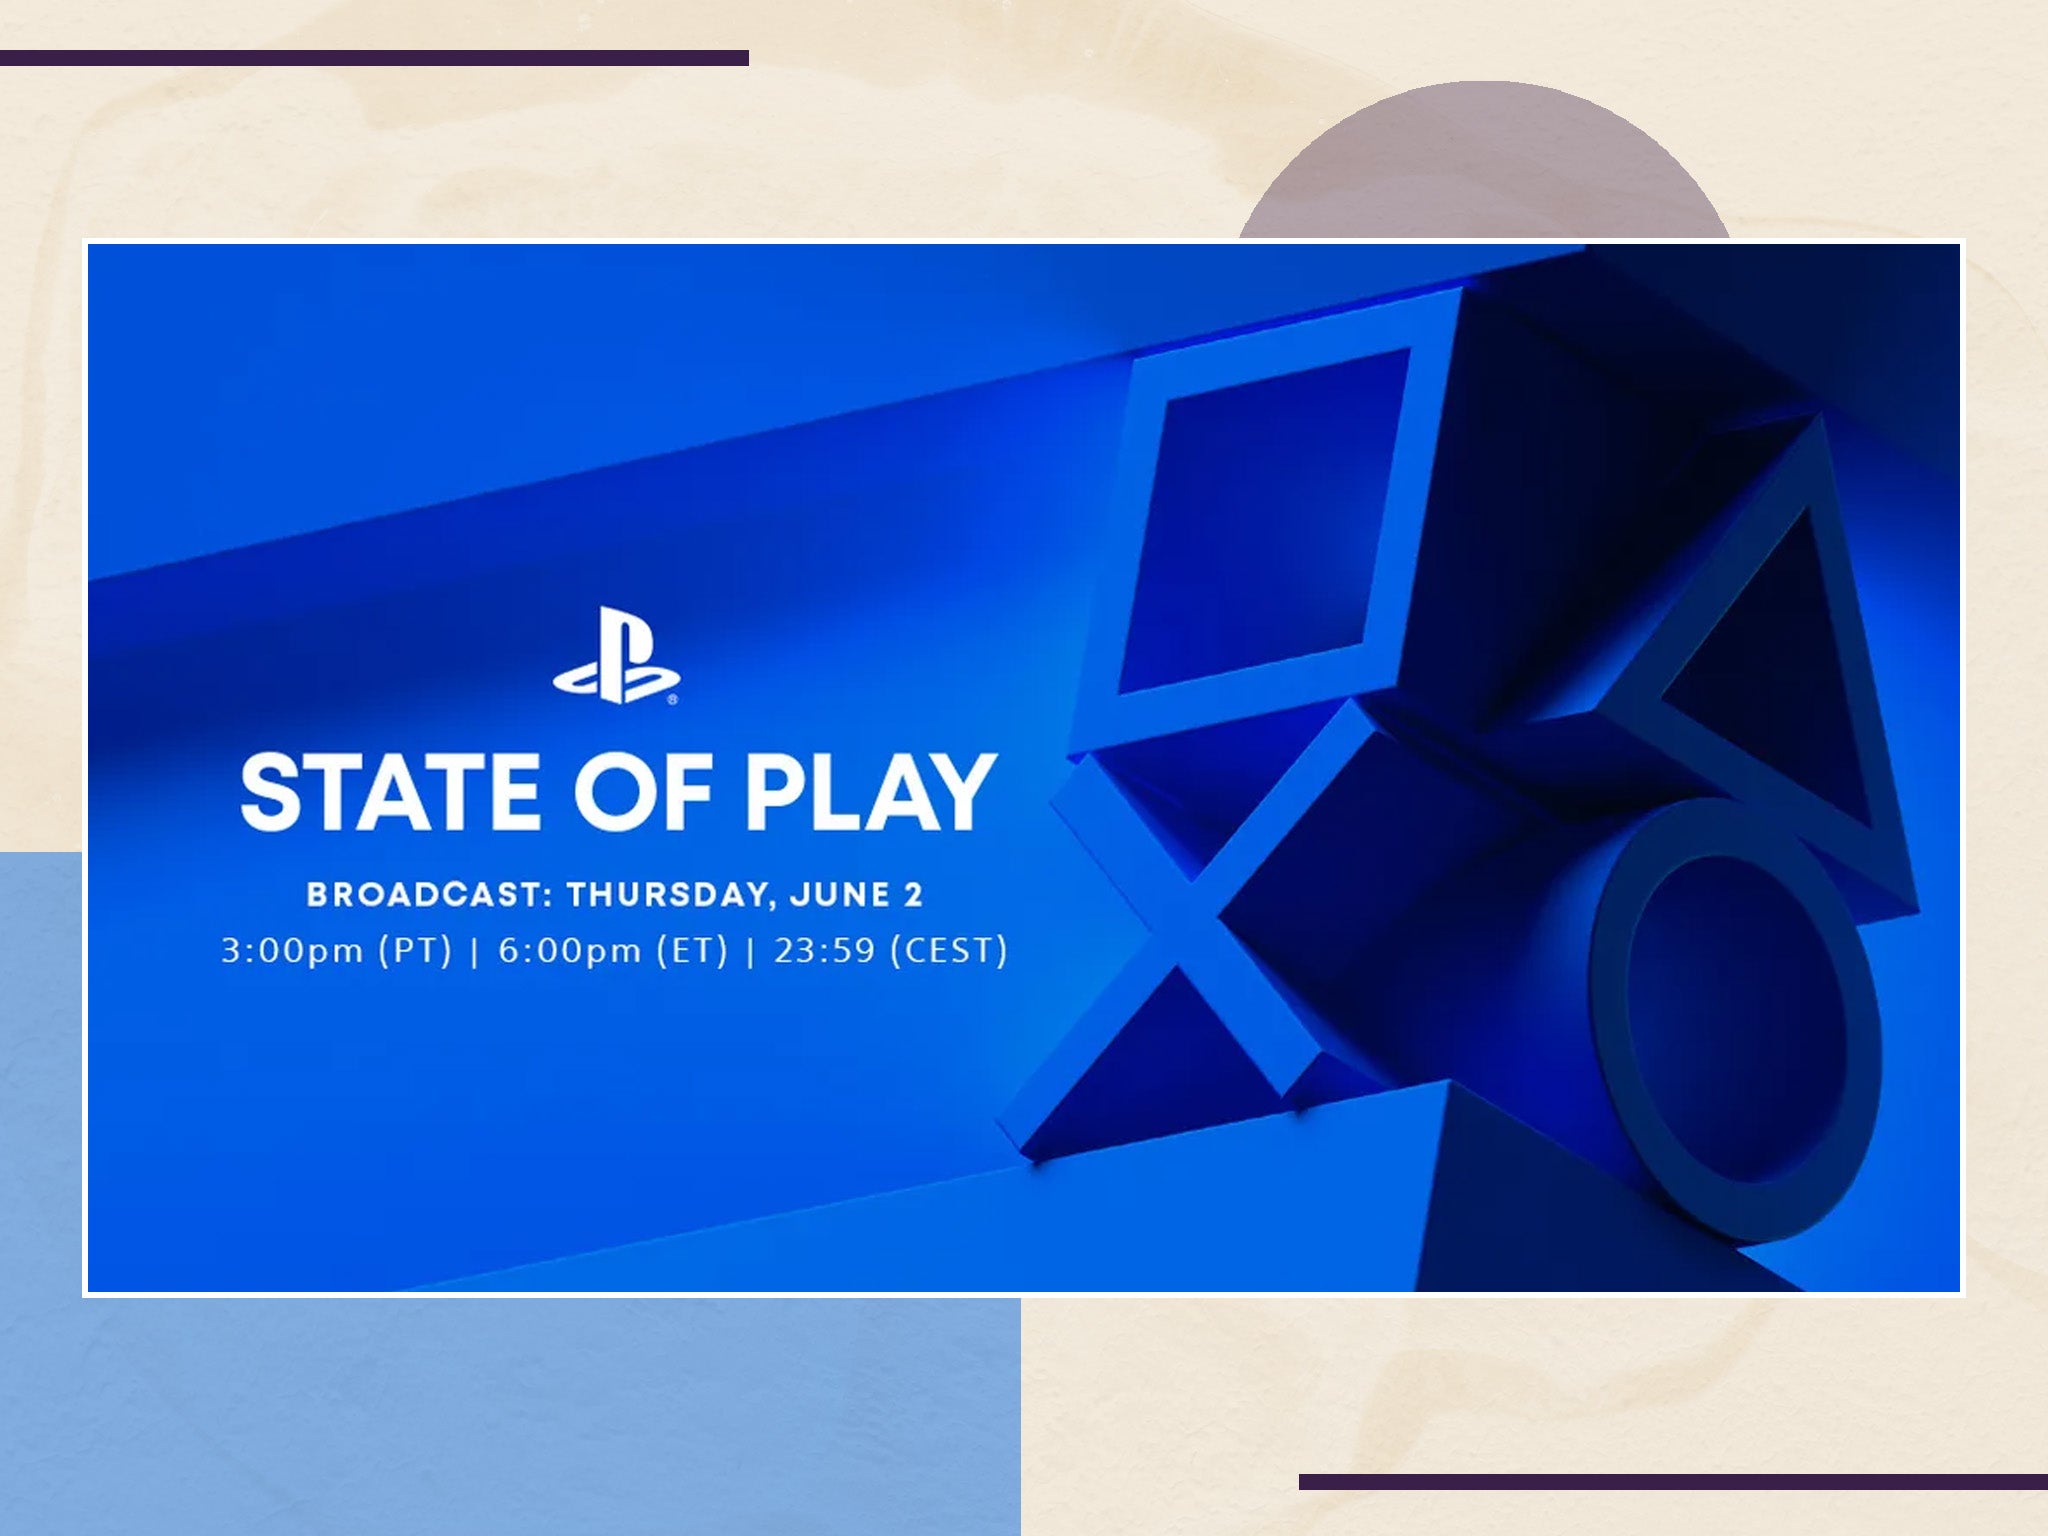 Playstation State of Play 2022: Start time, how to watch in the UK and more